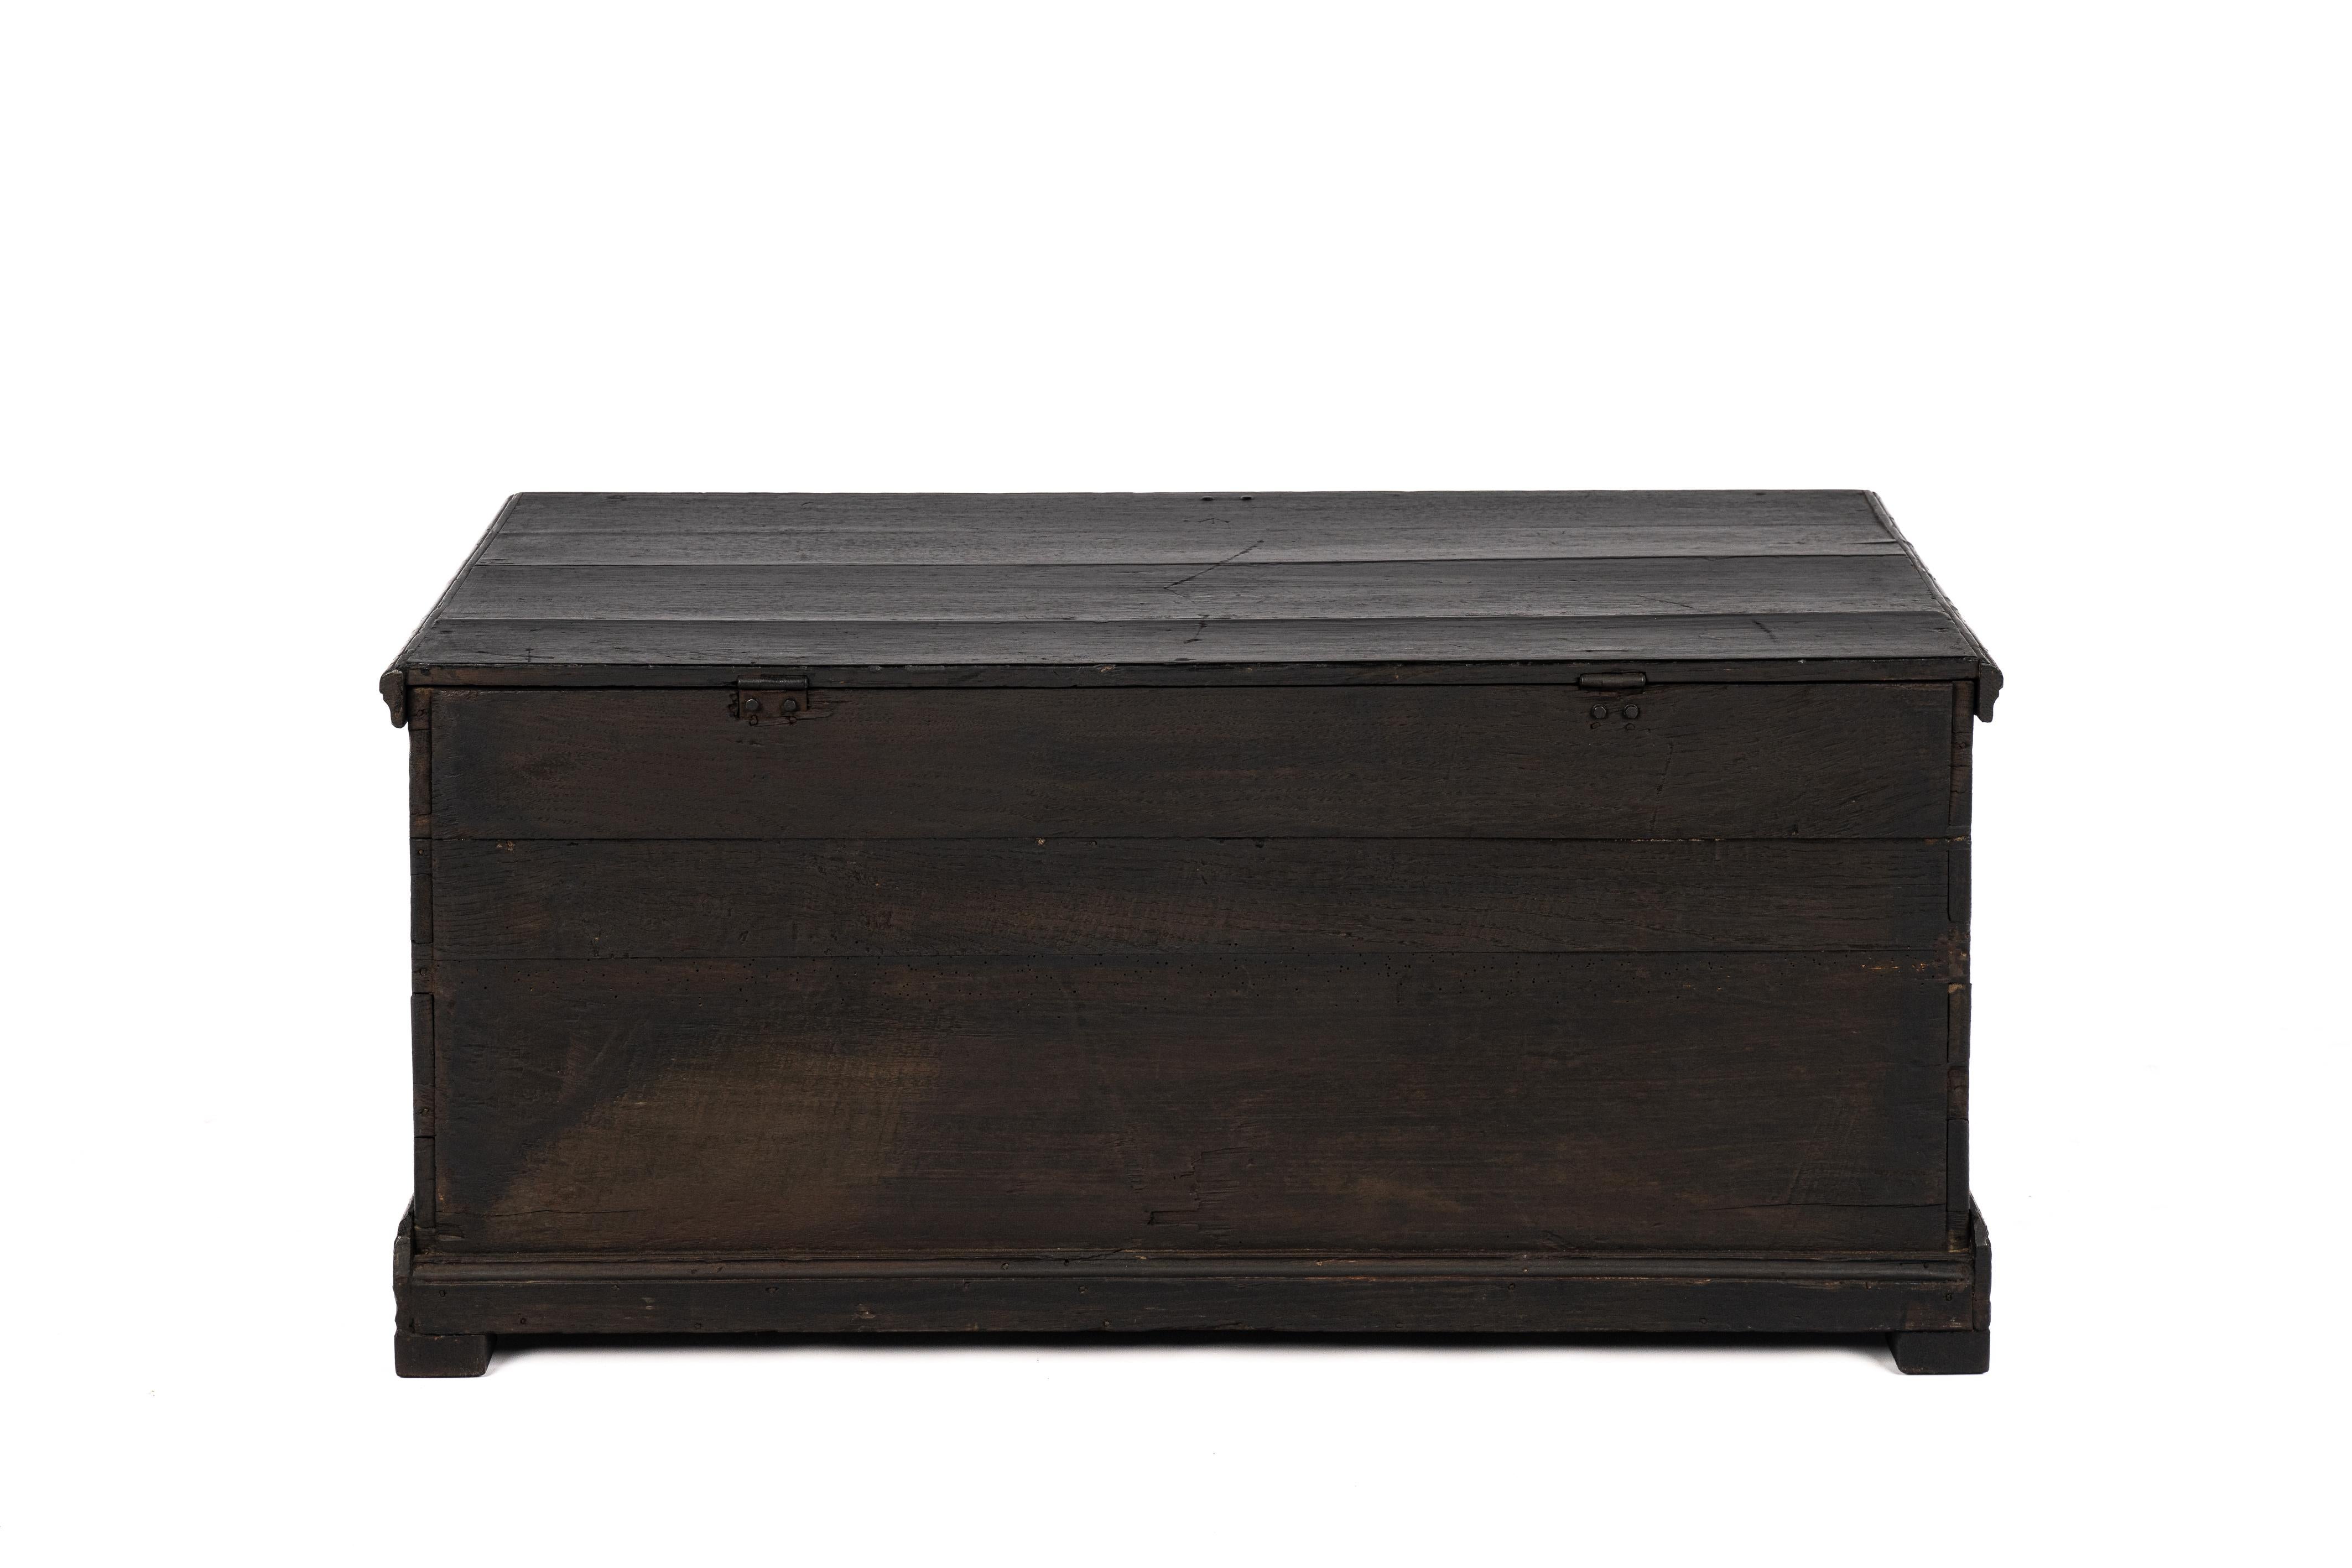 Antique 19th-century West German black oak blanket chest trunk or coffer In Good Condition For Sale In Casteren, NL